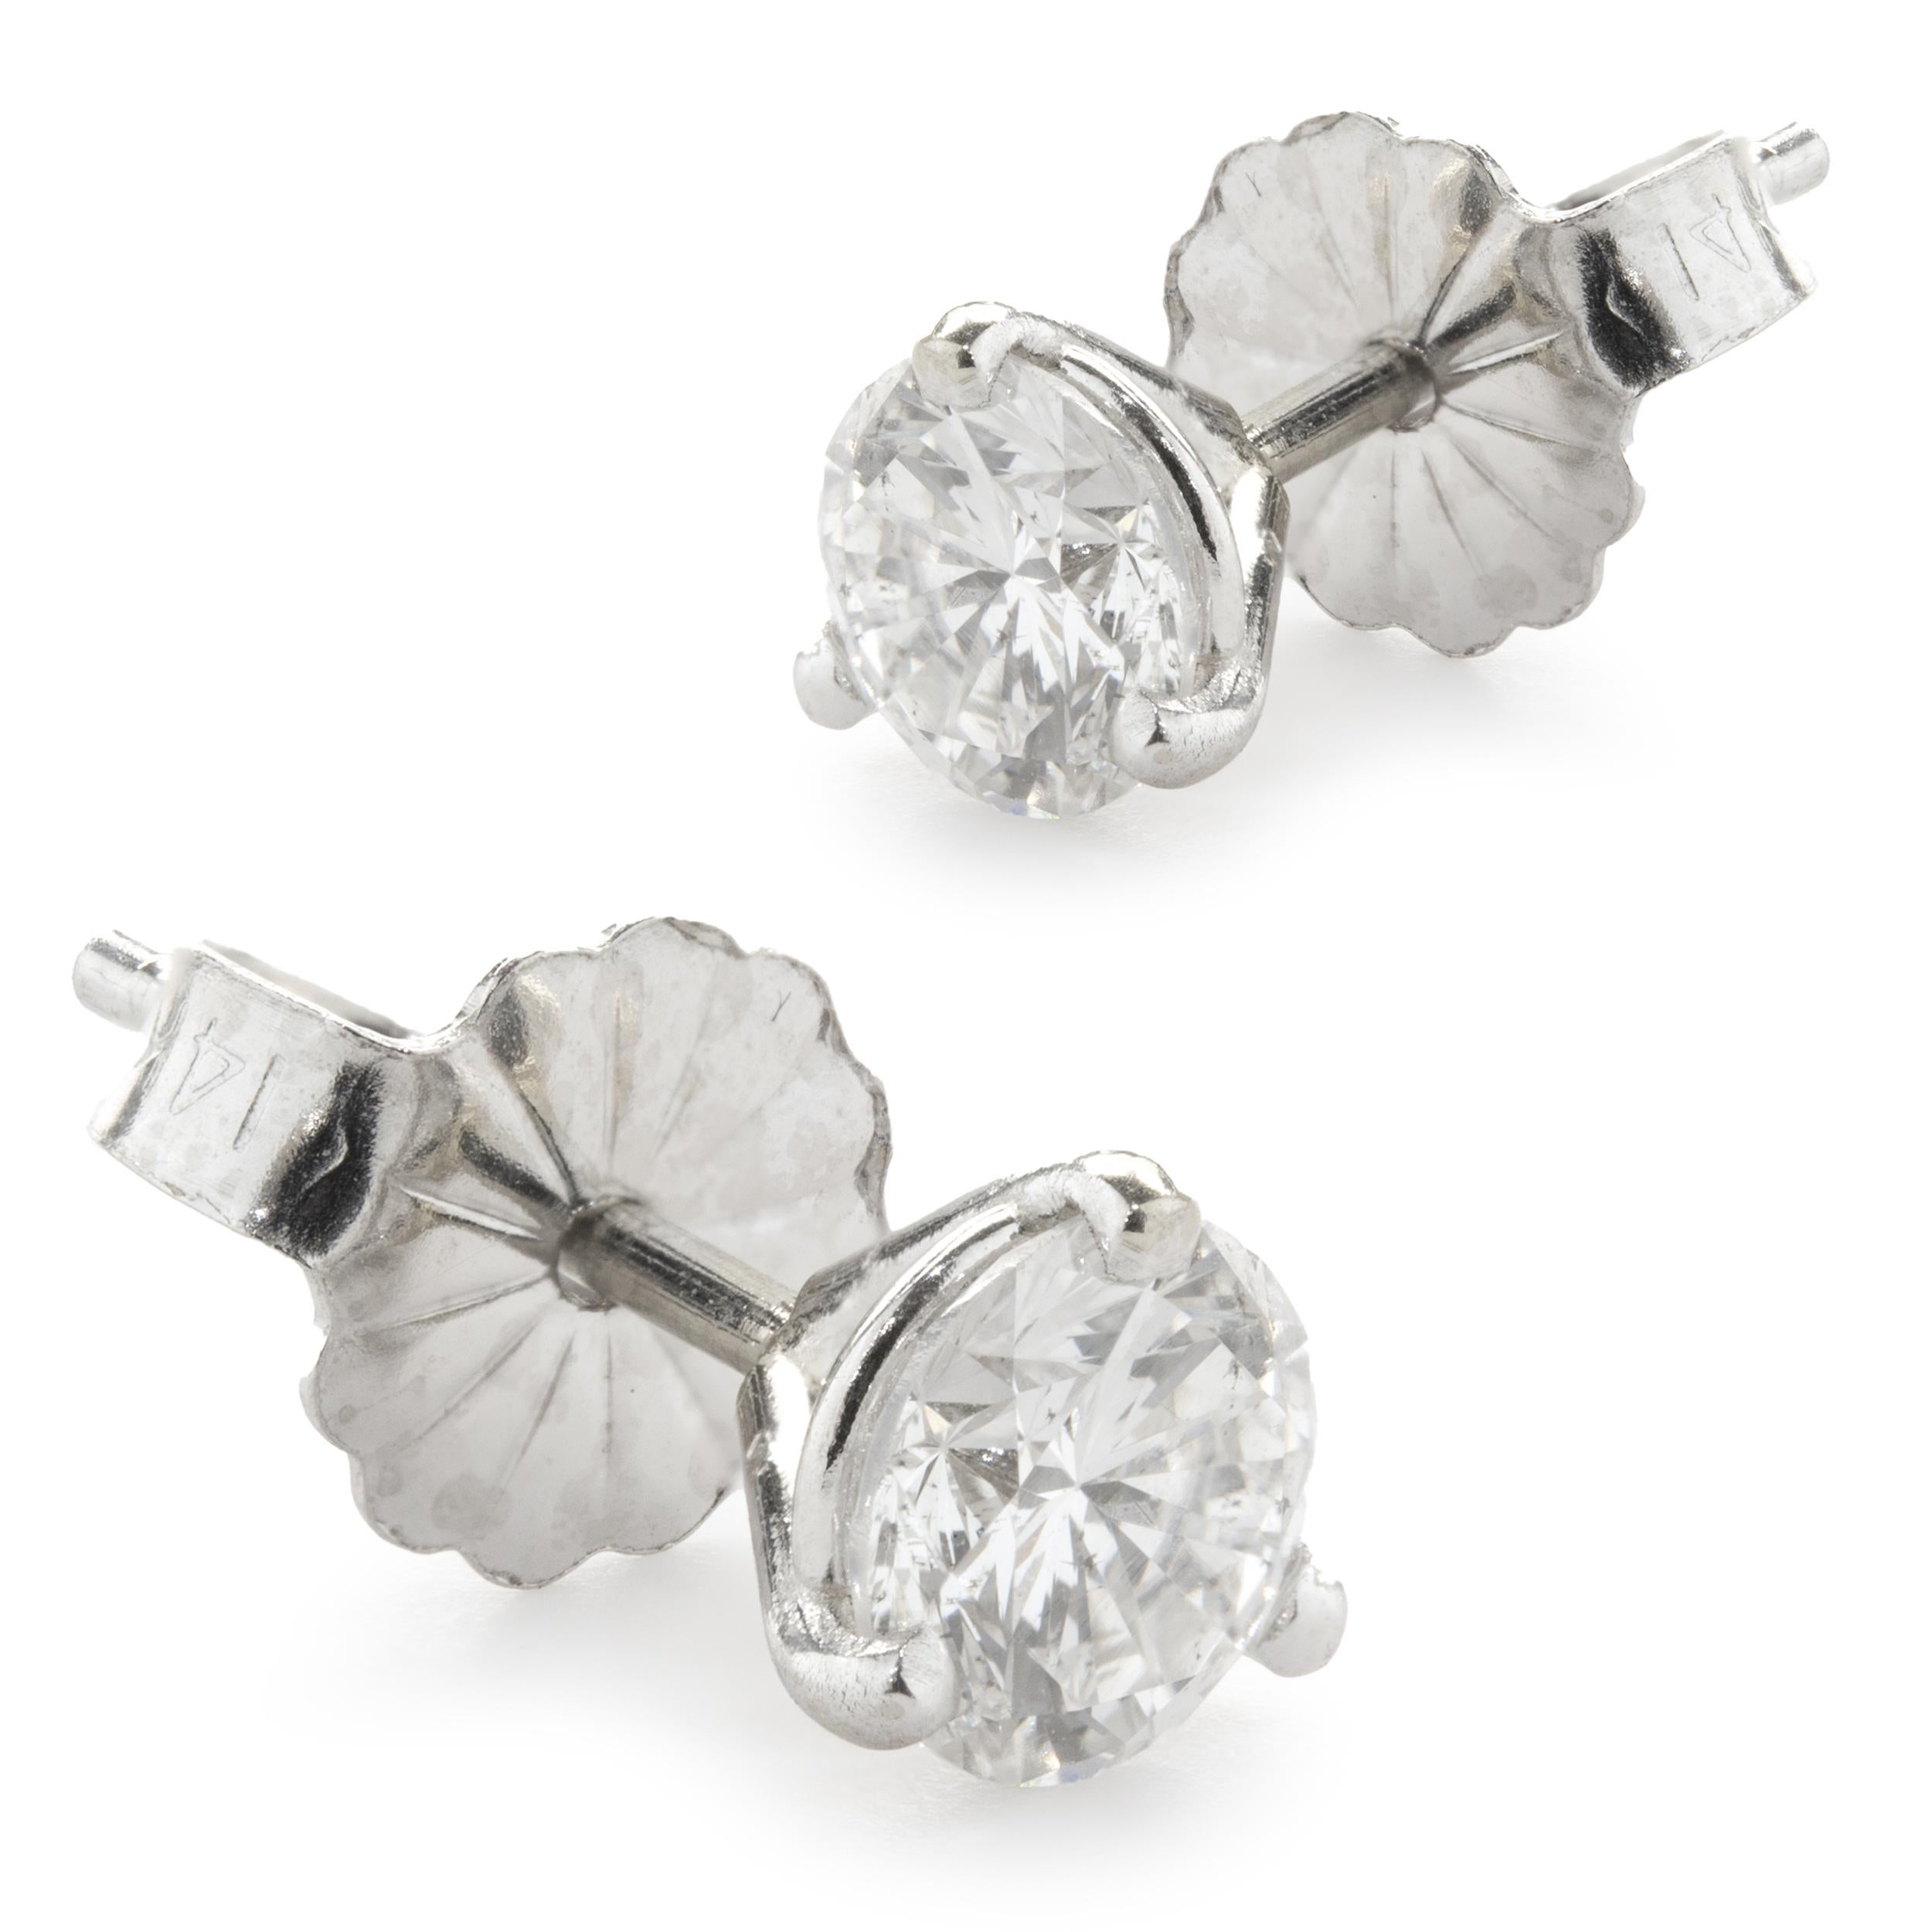 Material: 14k white gold
Diamond: 2 round brilliant cut = 0.70cttw 
Color: F / G
Clarity: VS2-SI1
Dimensions: earrings measure approximately 4.90mm in diameter
Fastenings: post with friction backs
Weight: 0.78 grams
